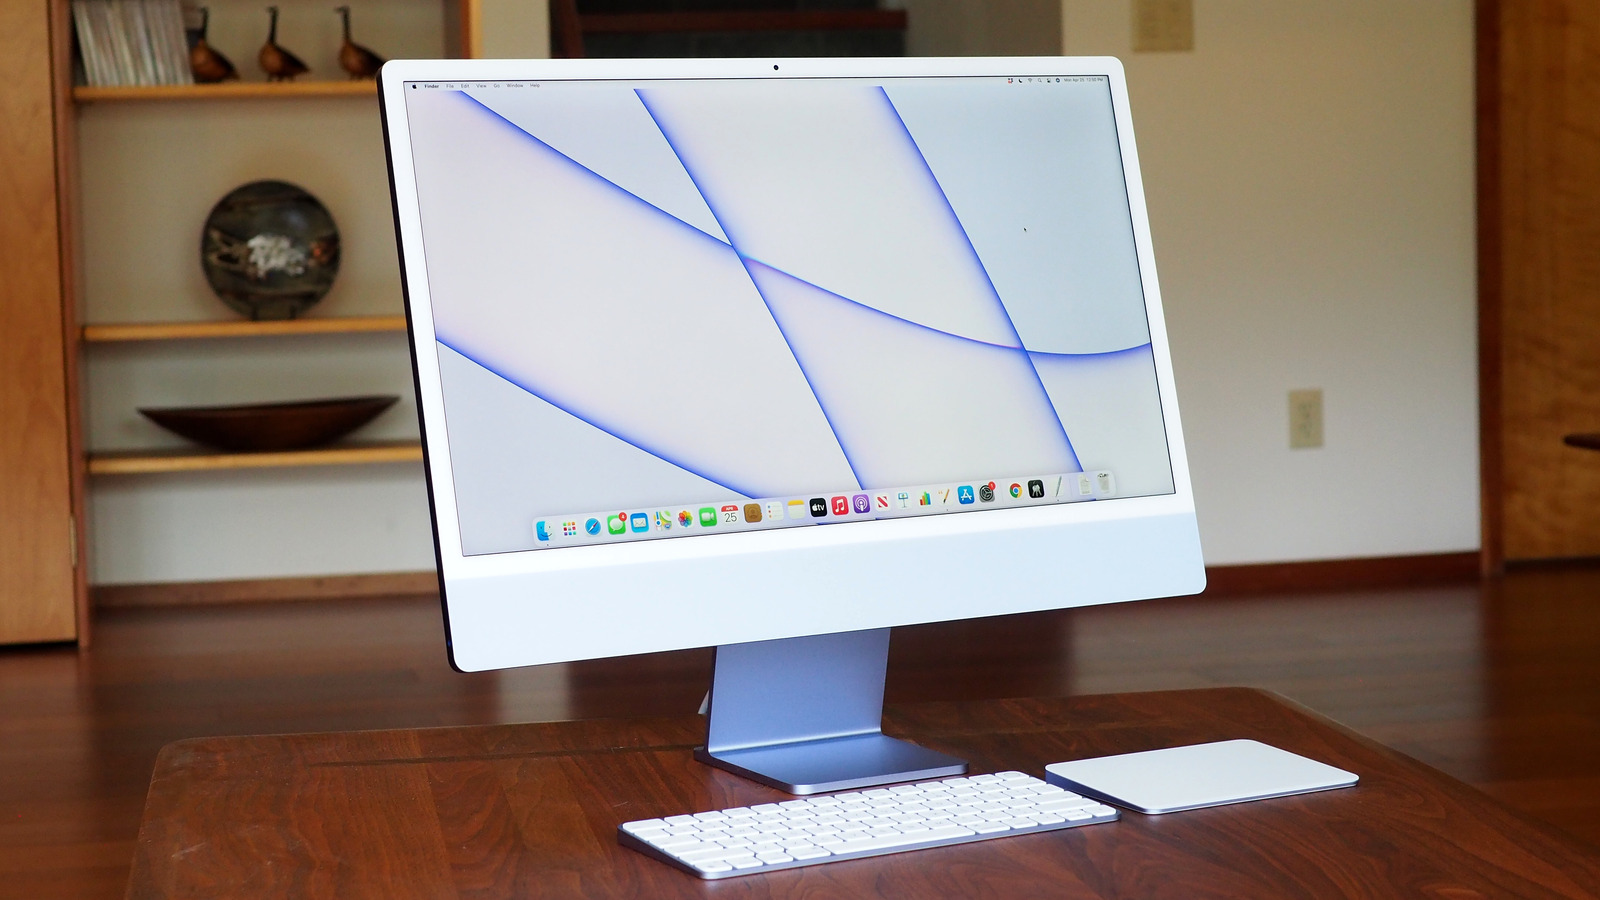 For Most People Mac The Review: Apple iMac 24-Inch Right